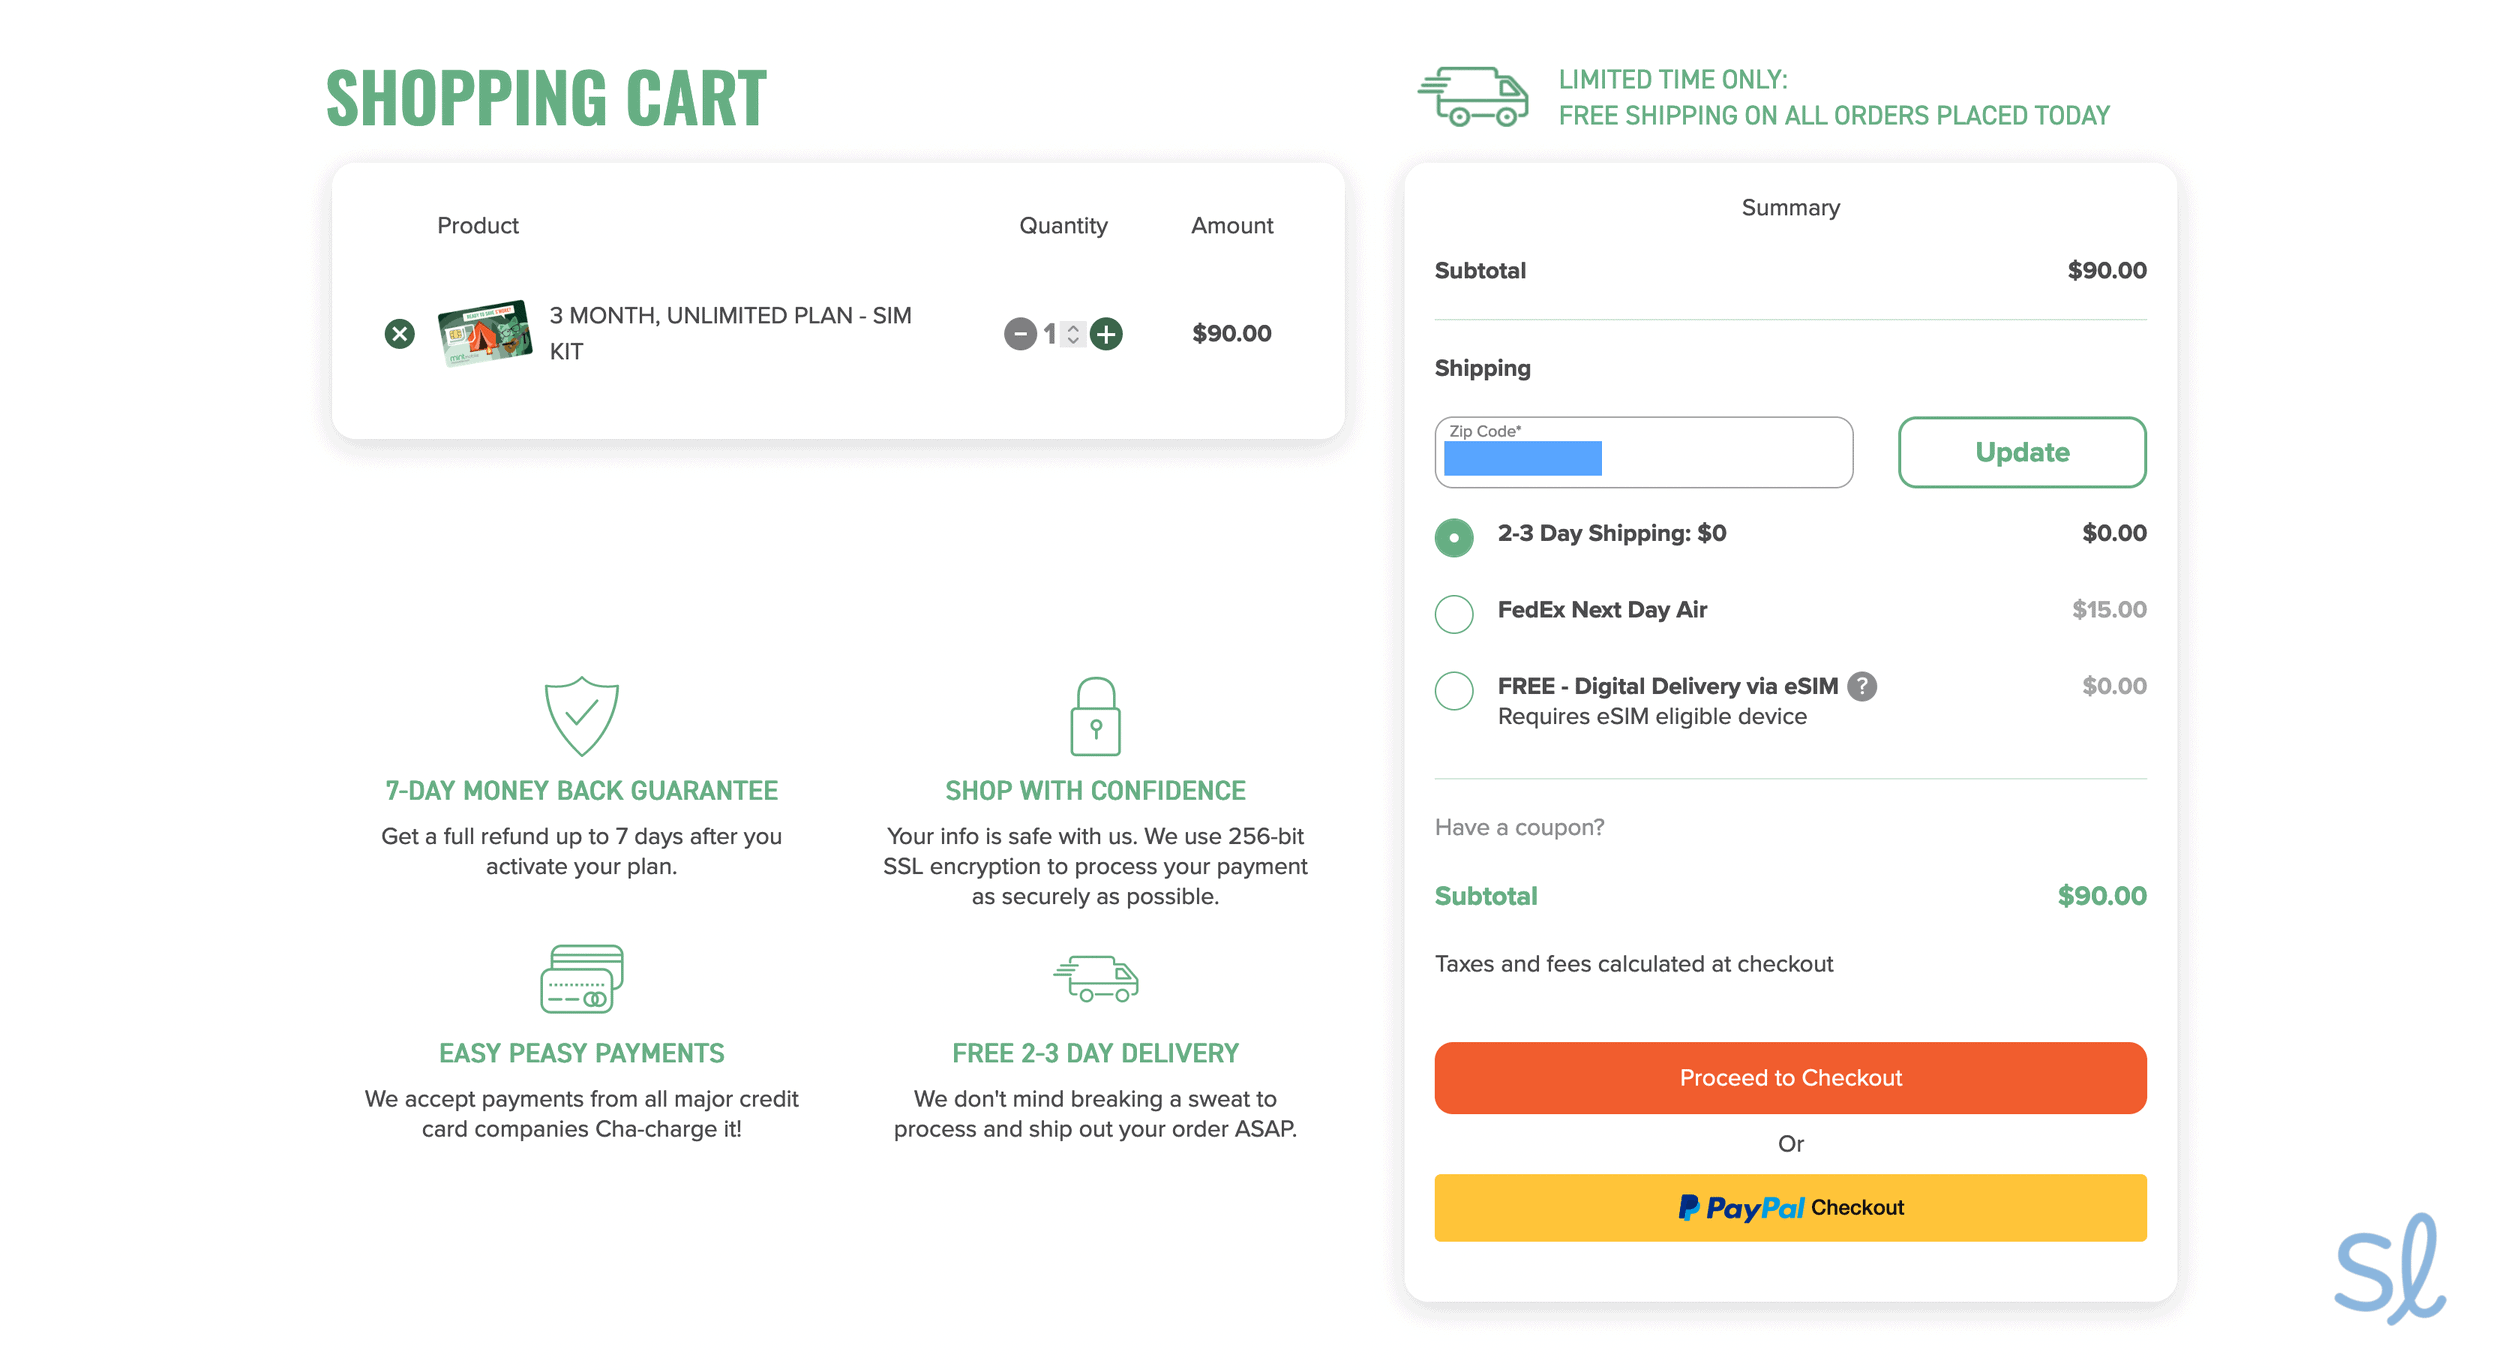 Mint will ship your SIM to you for free in 2-3 days